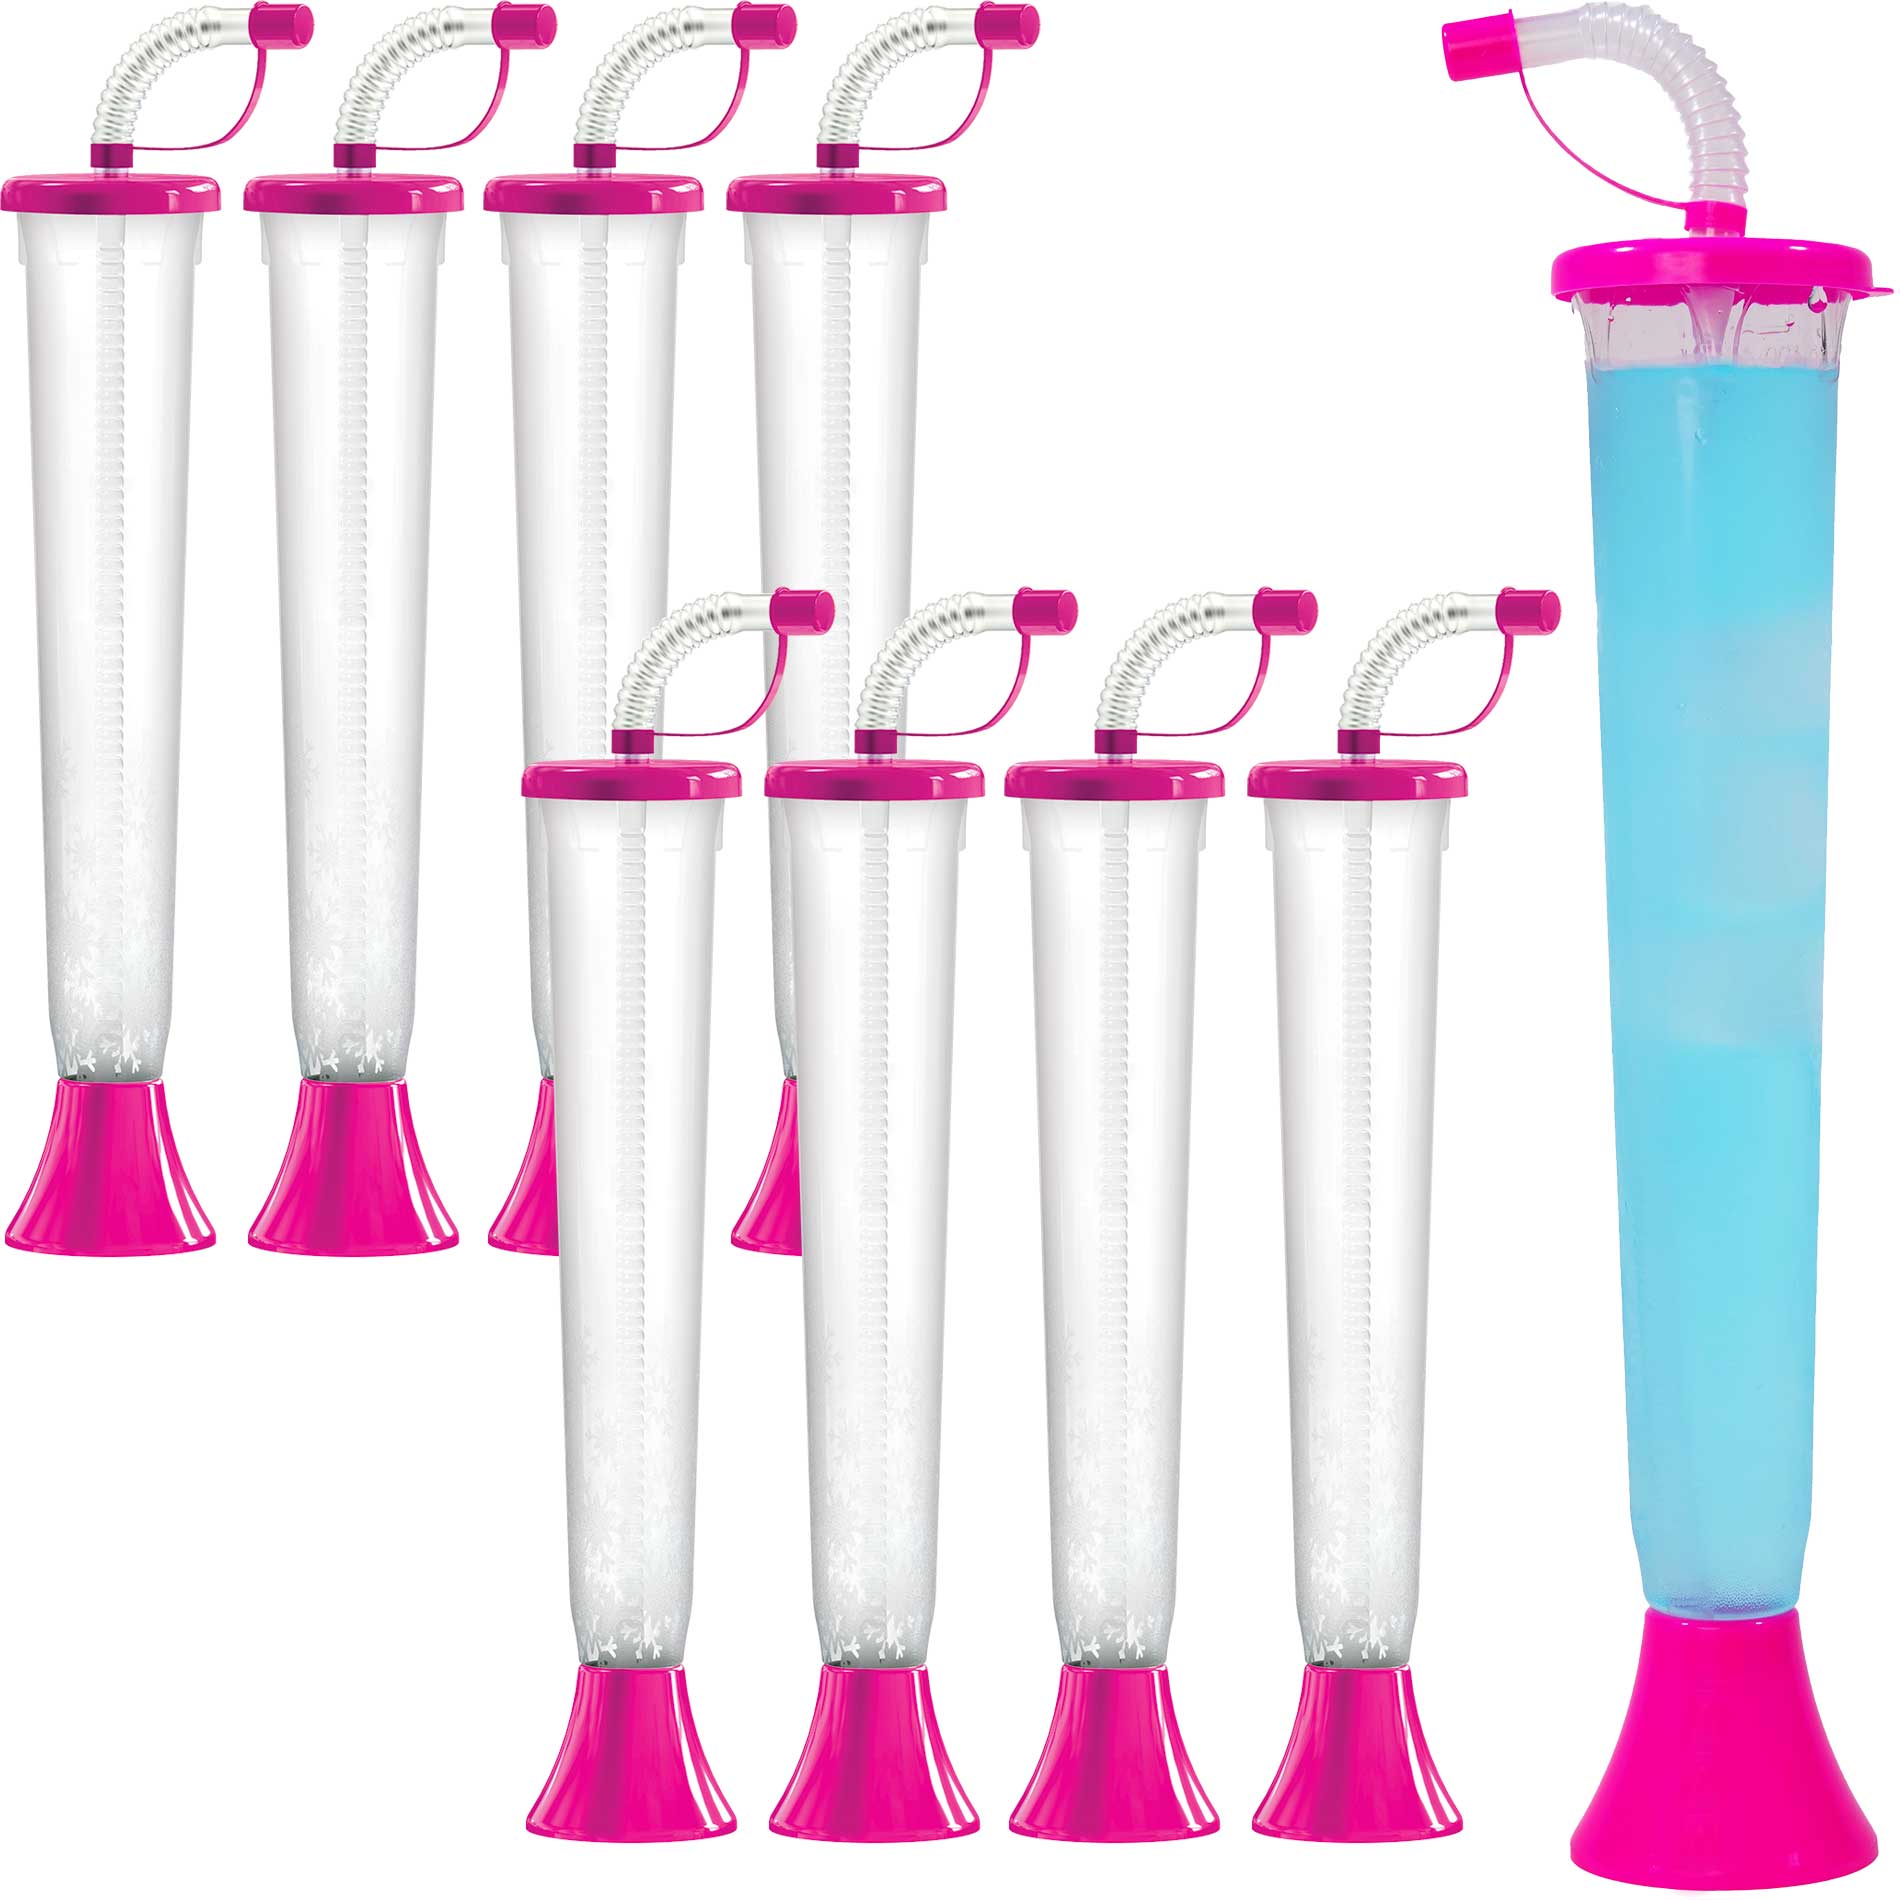 http://noveltycupsusa.com/cdn/shop/files/sweet-world-usa-yard-cups-54-or-108-cups-yard-cups-with-pink-lids-and-straws-14oz-for-margaritas-and-frozen-drinks-cups-with-lids-and-straws-35523714482335.jpg?v=1684775681